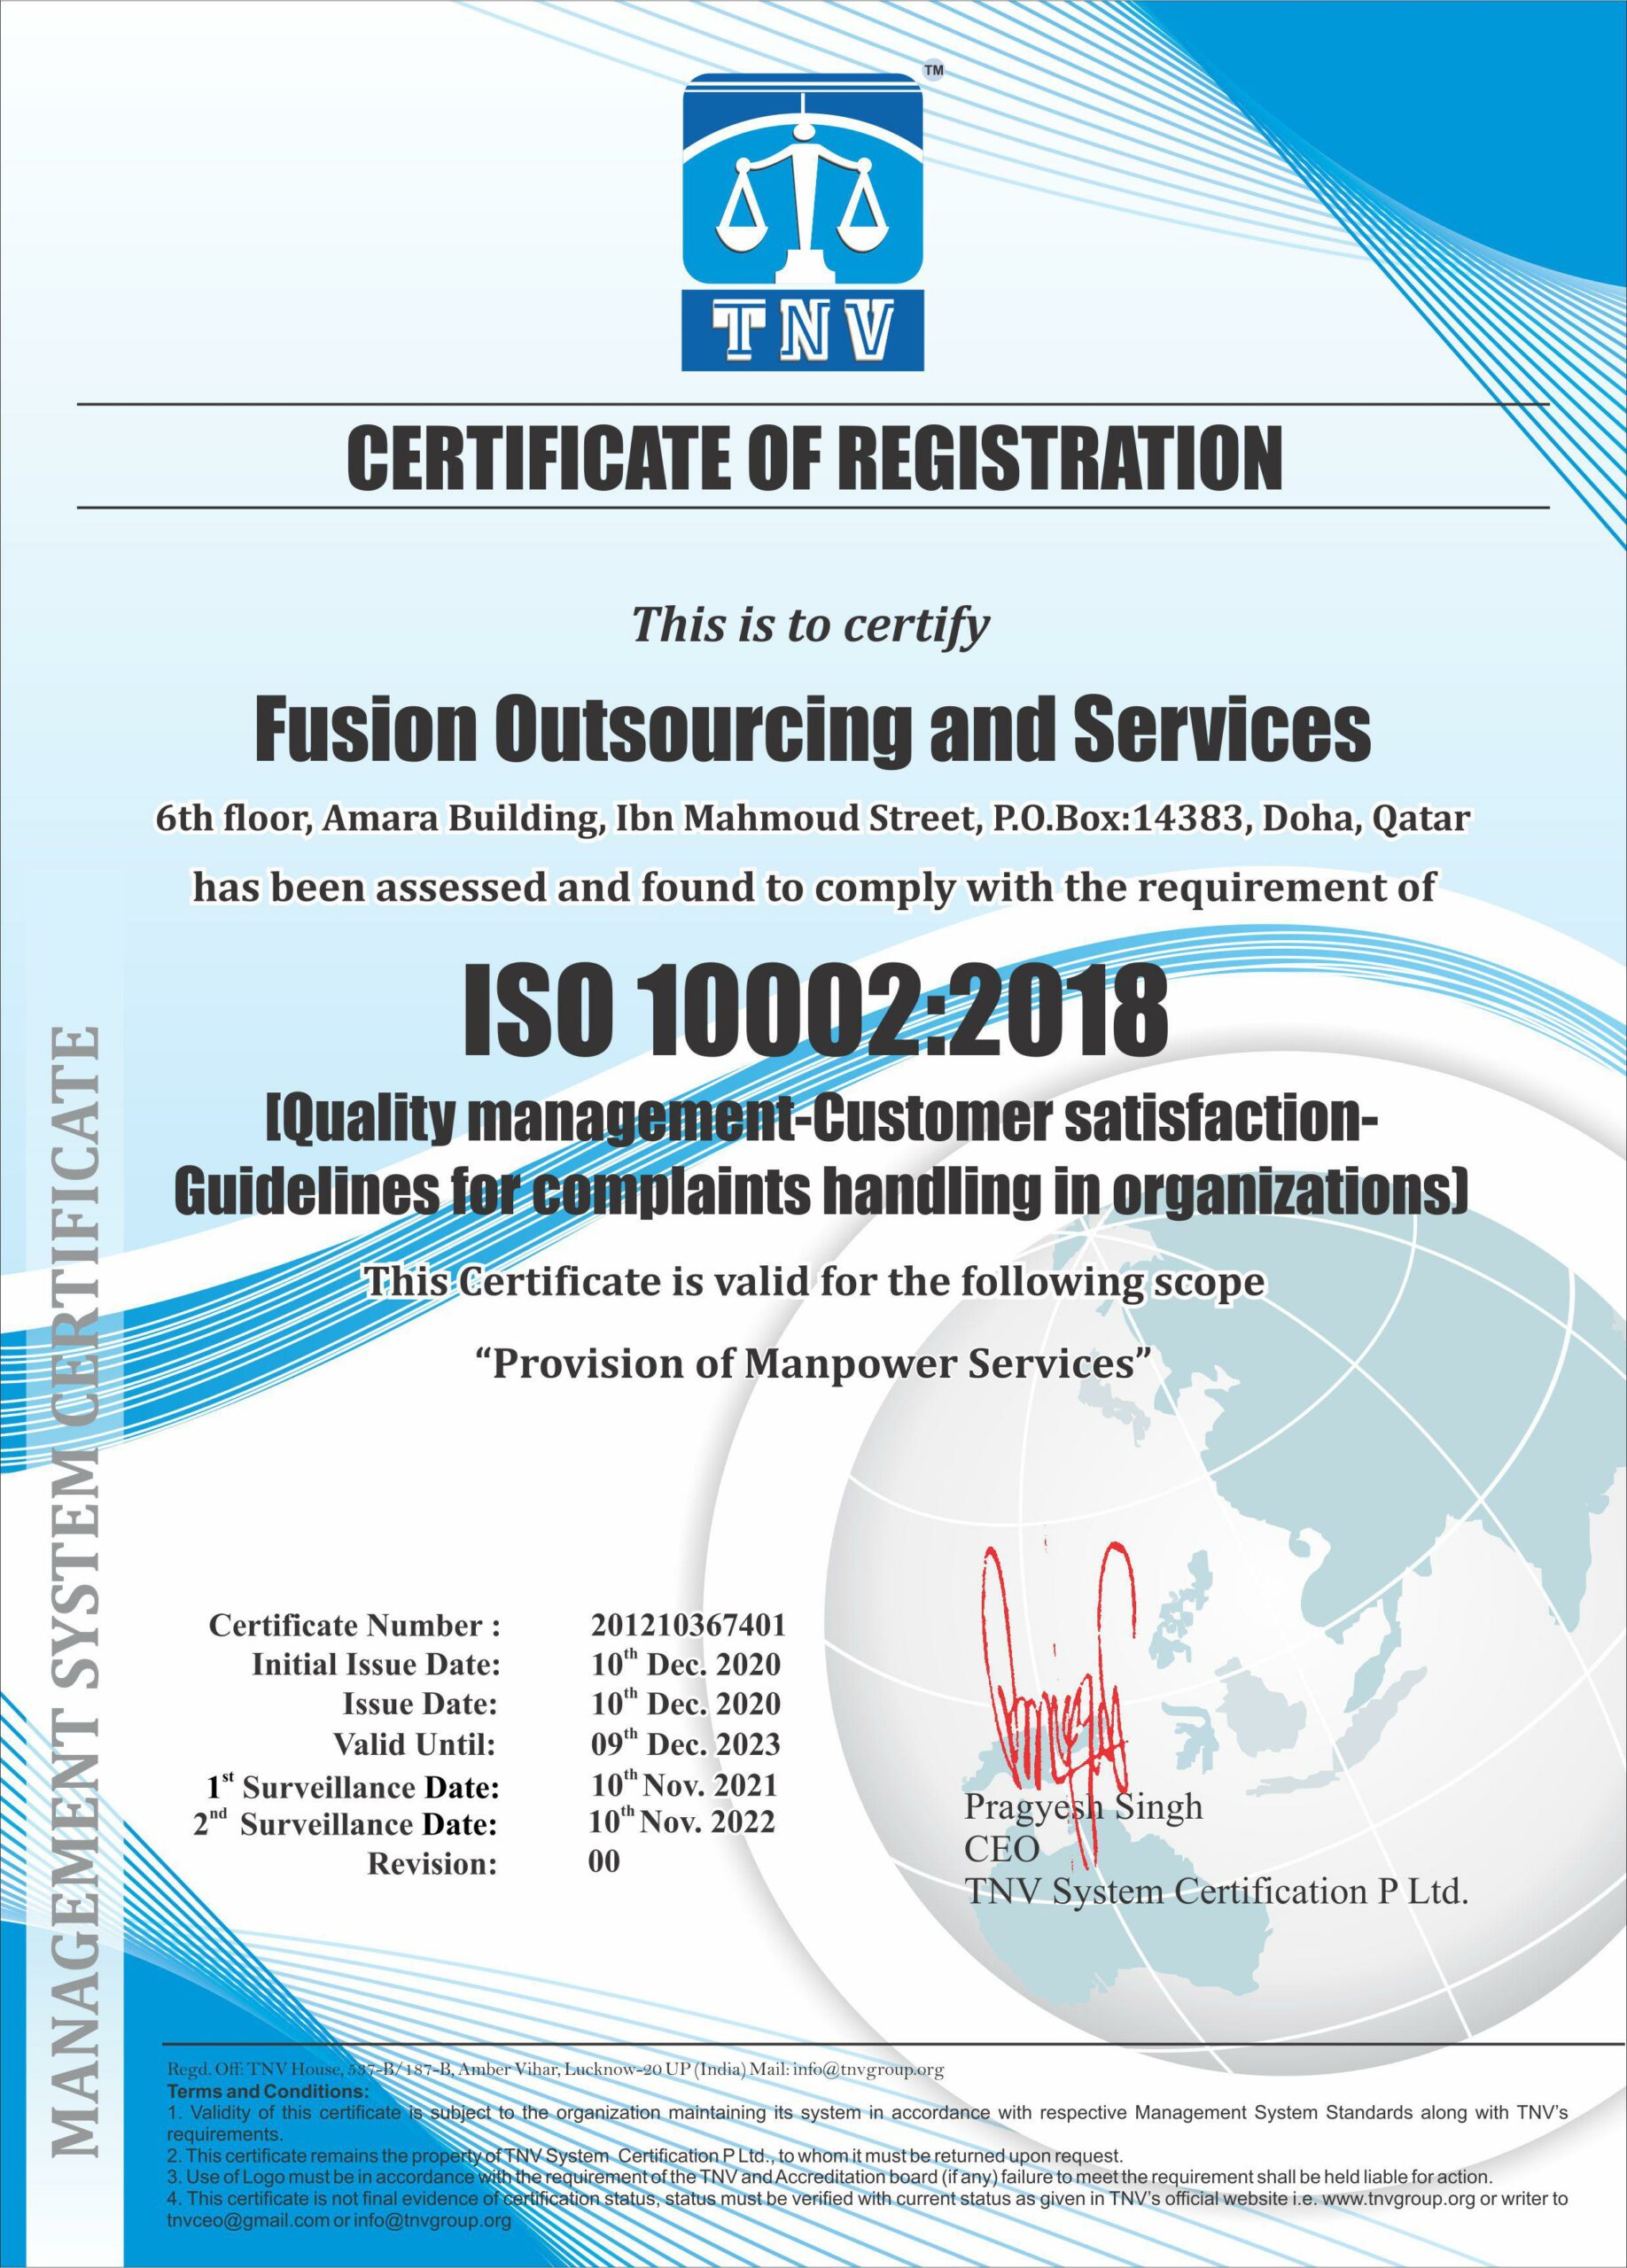 ISO 10002:2018 <br> Customer Satisfaction Management System